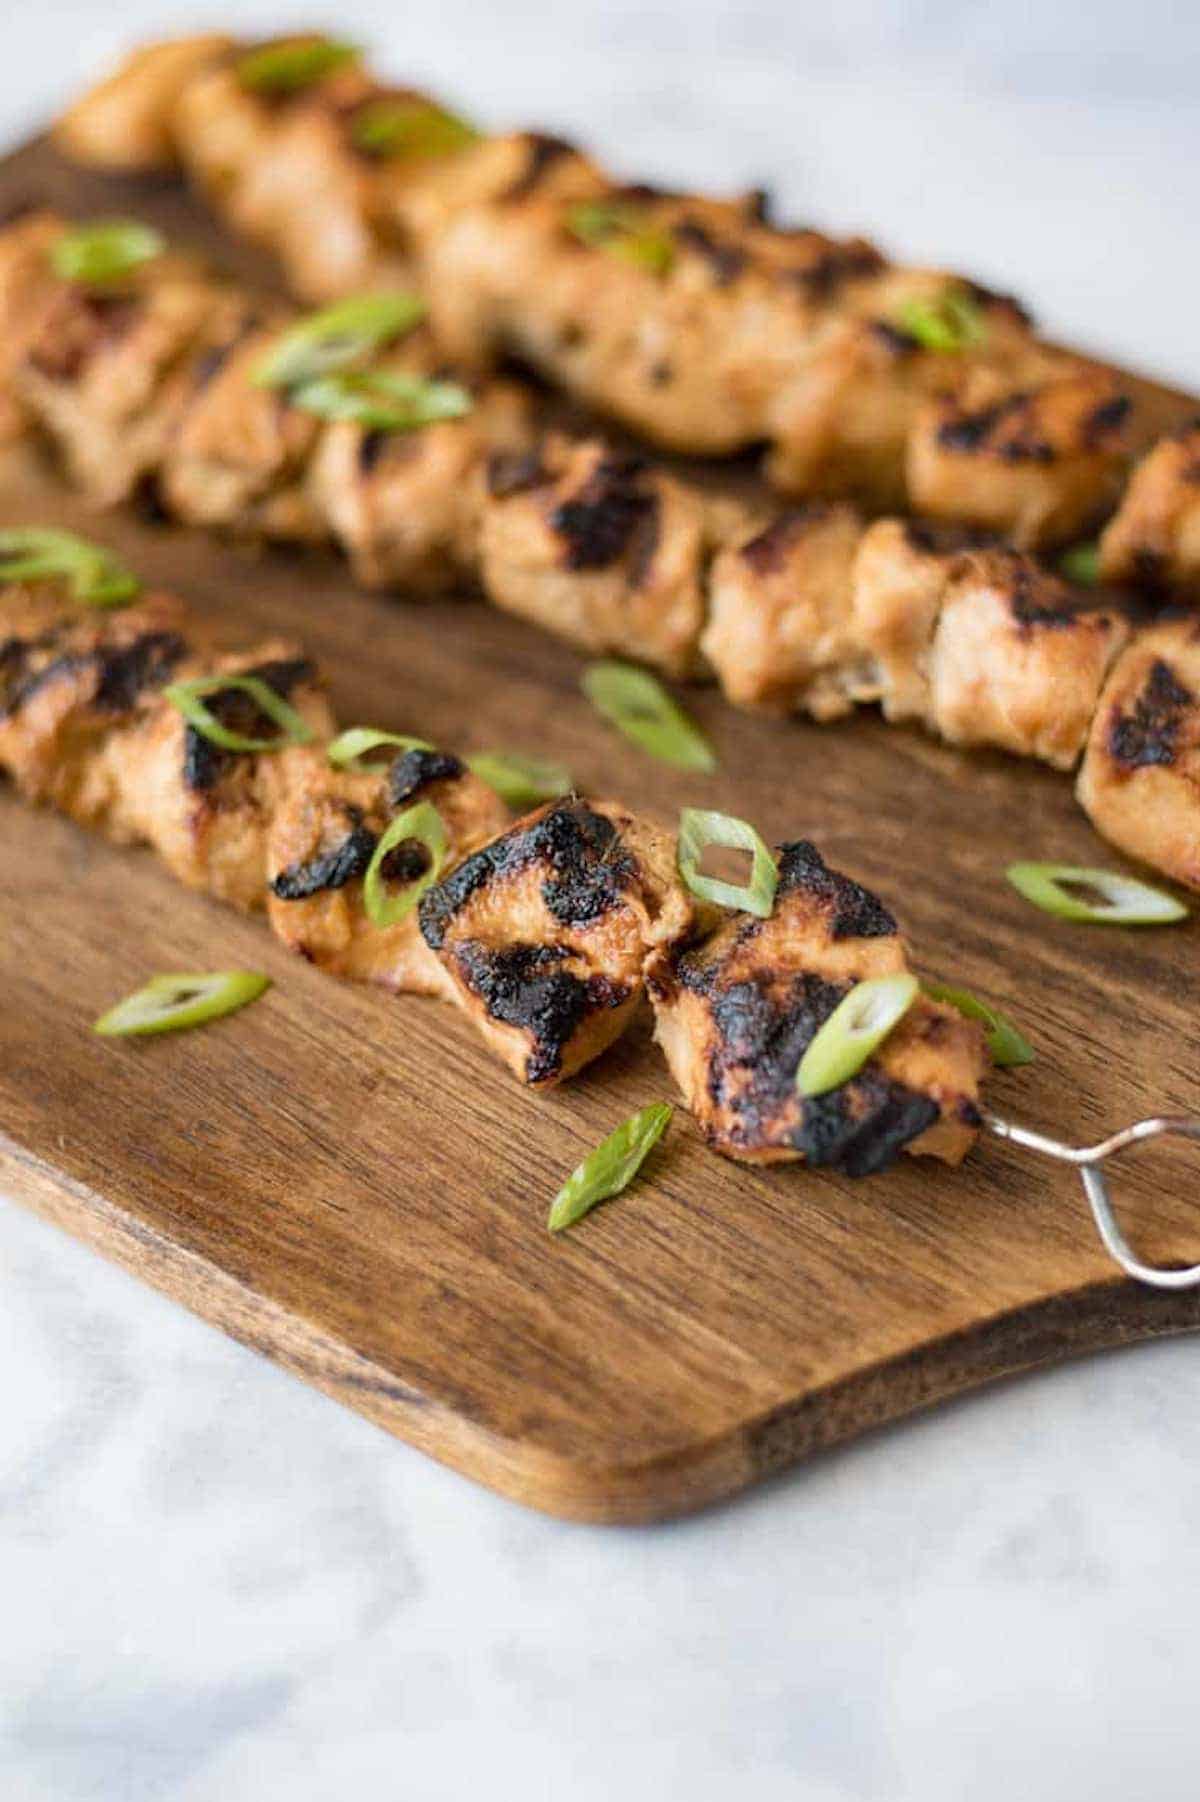 3 grilled chicken skewers on a wooden board.